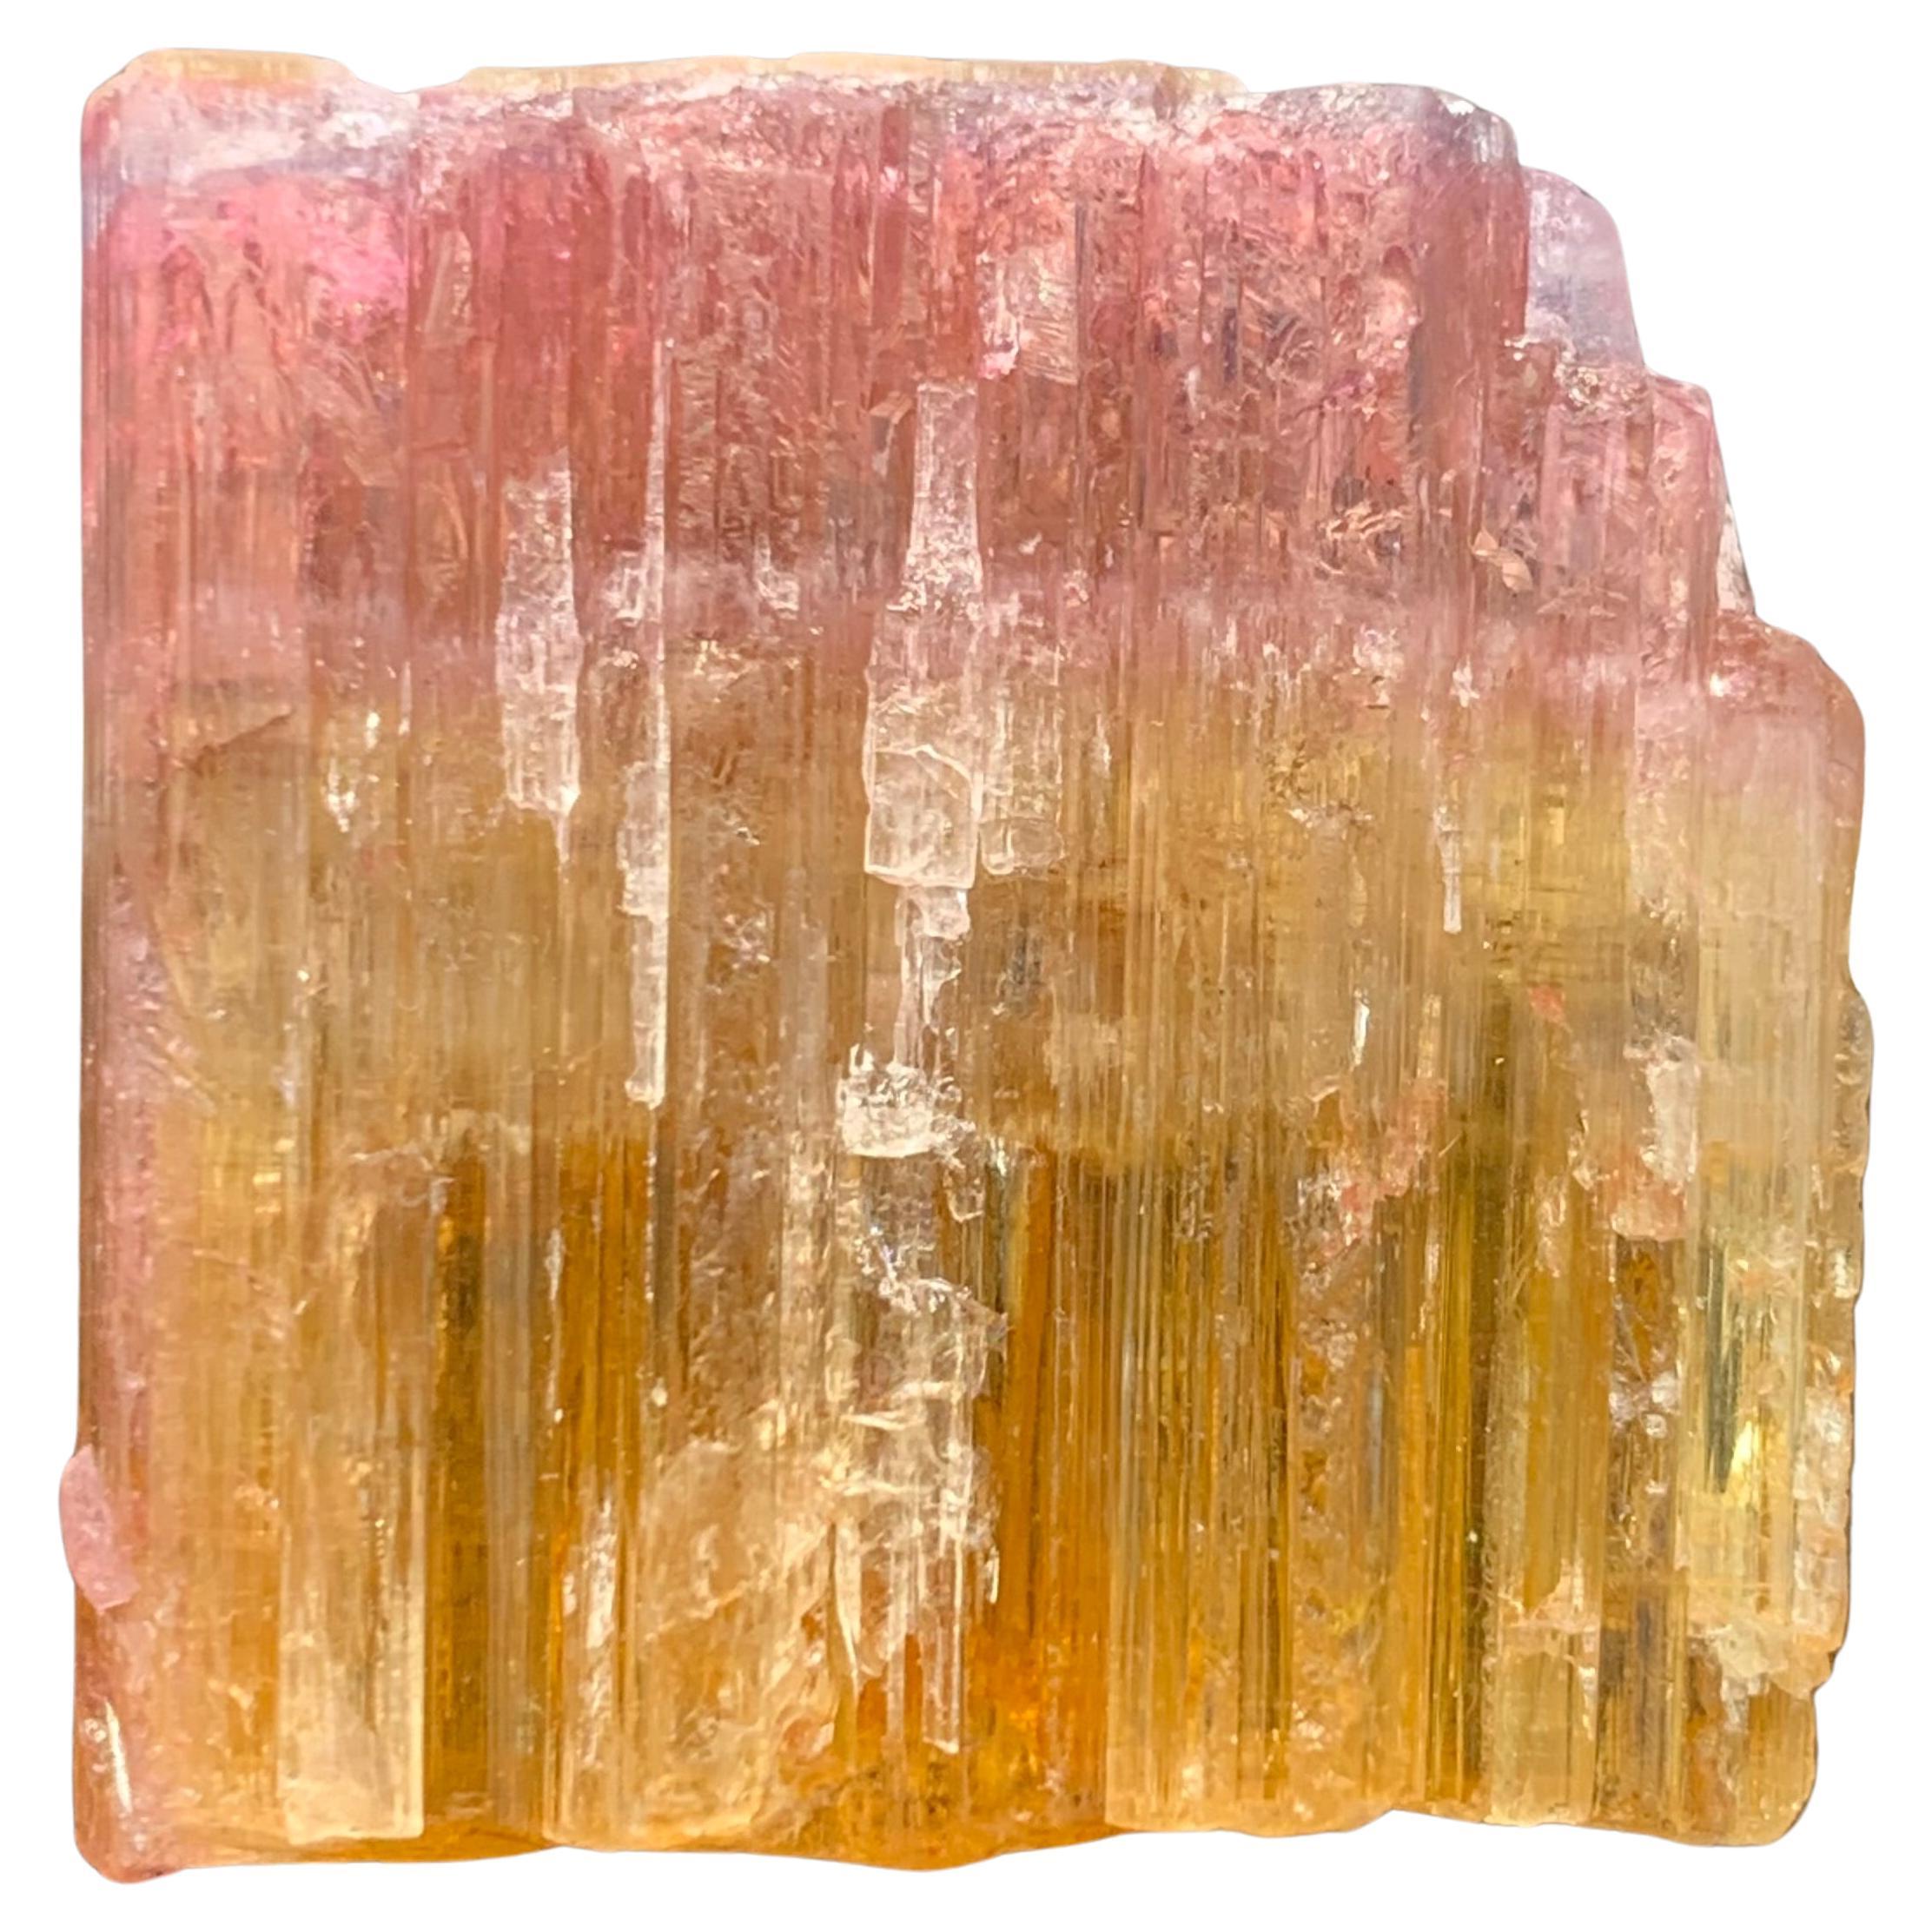 59.15 Carat Beautiful Bi Color Tourmaline Crystal From Paprook Mine, Afghanistan For Sale